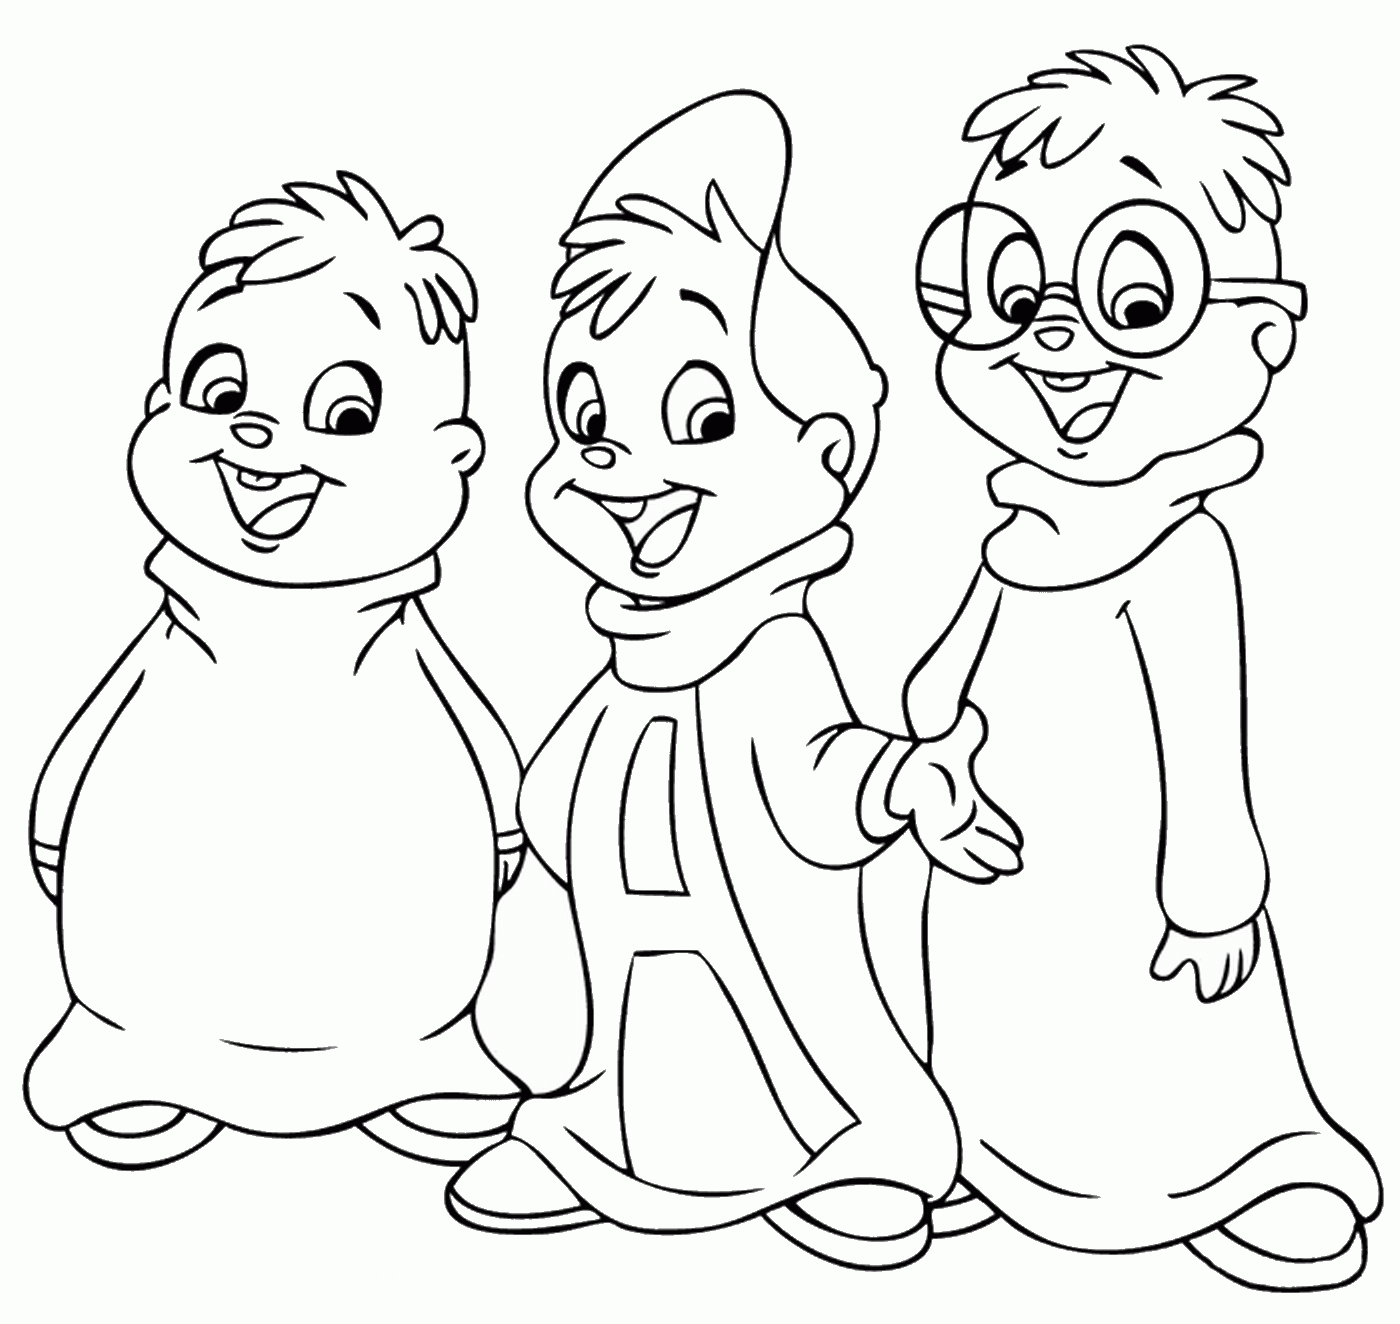 Alvin and the Chipmunks Coloring Pages TV Film alvin_cl_4 Printable 2020 00062 Coloring4free